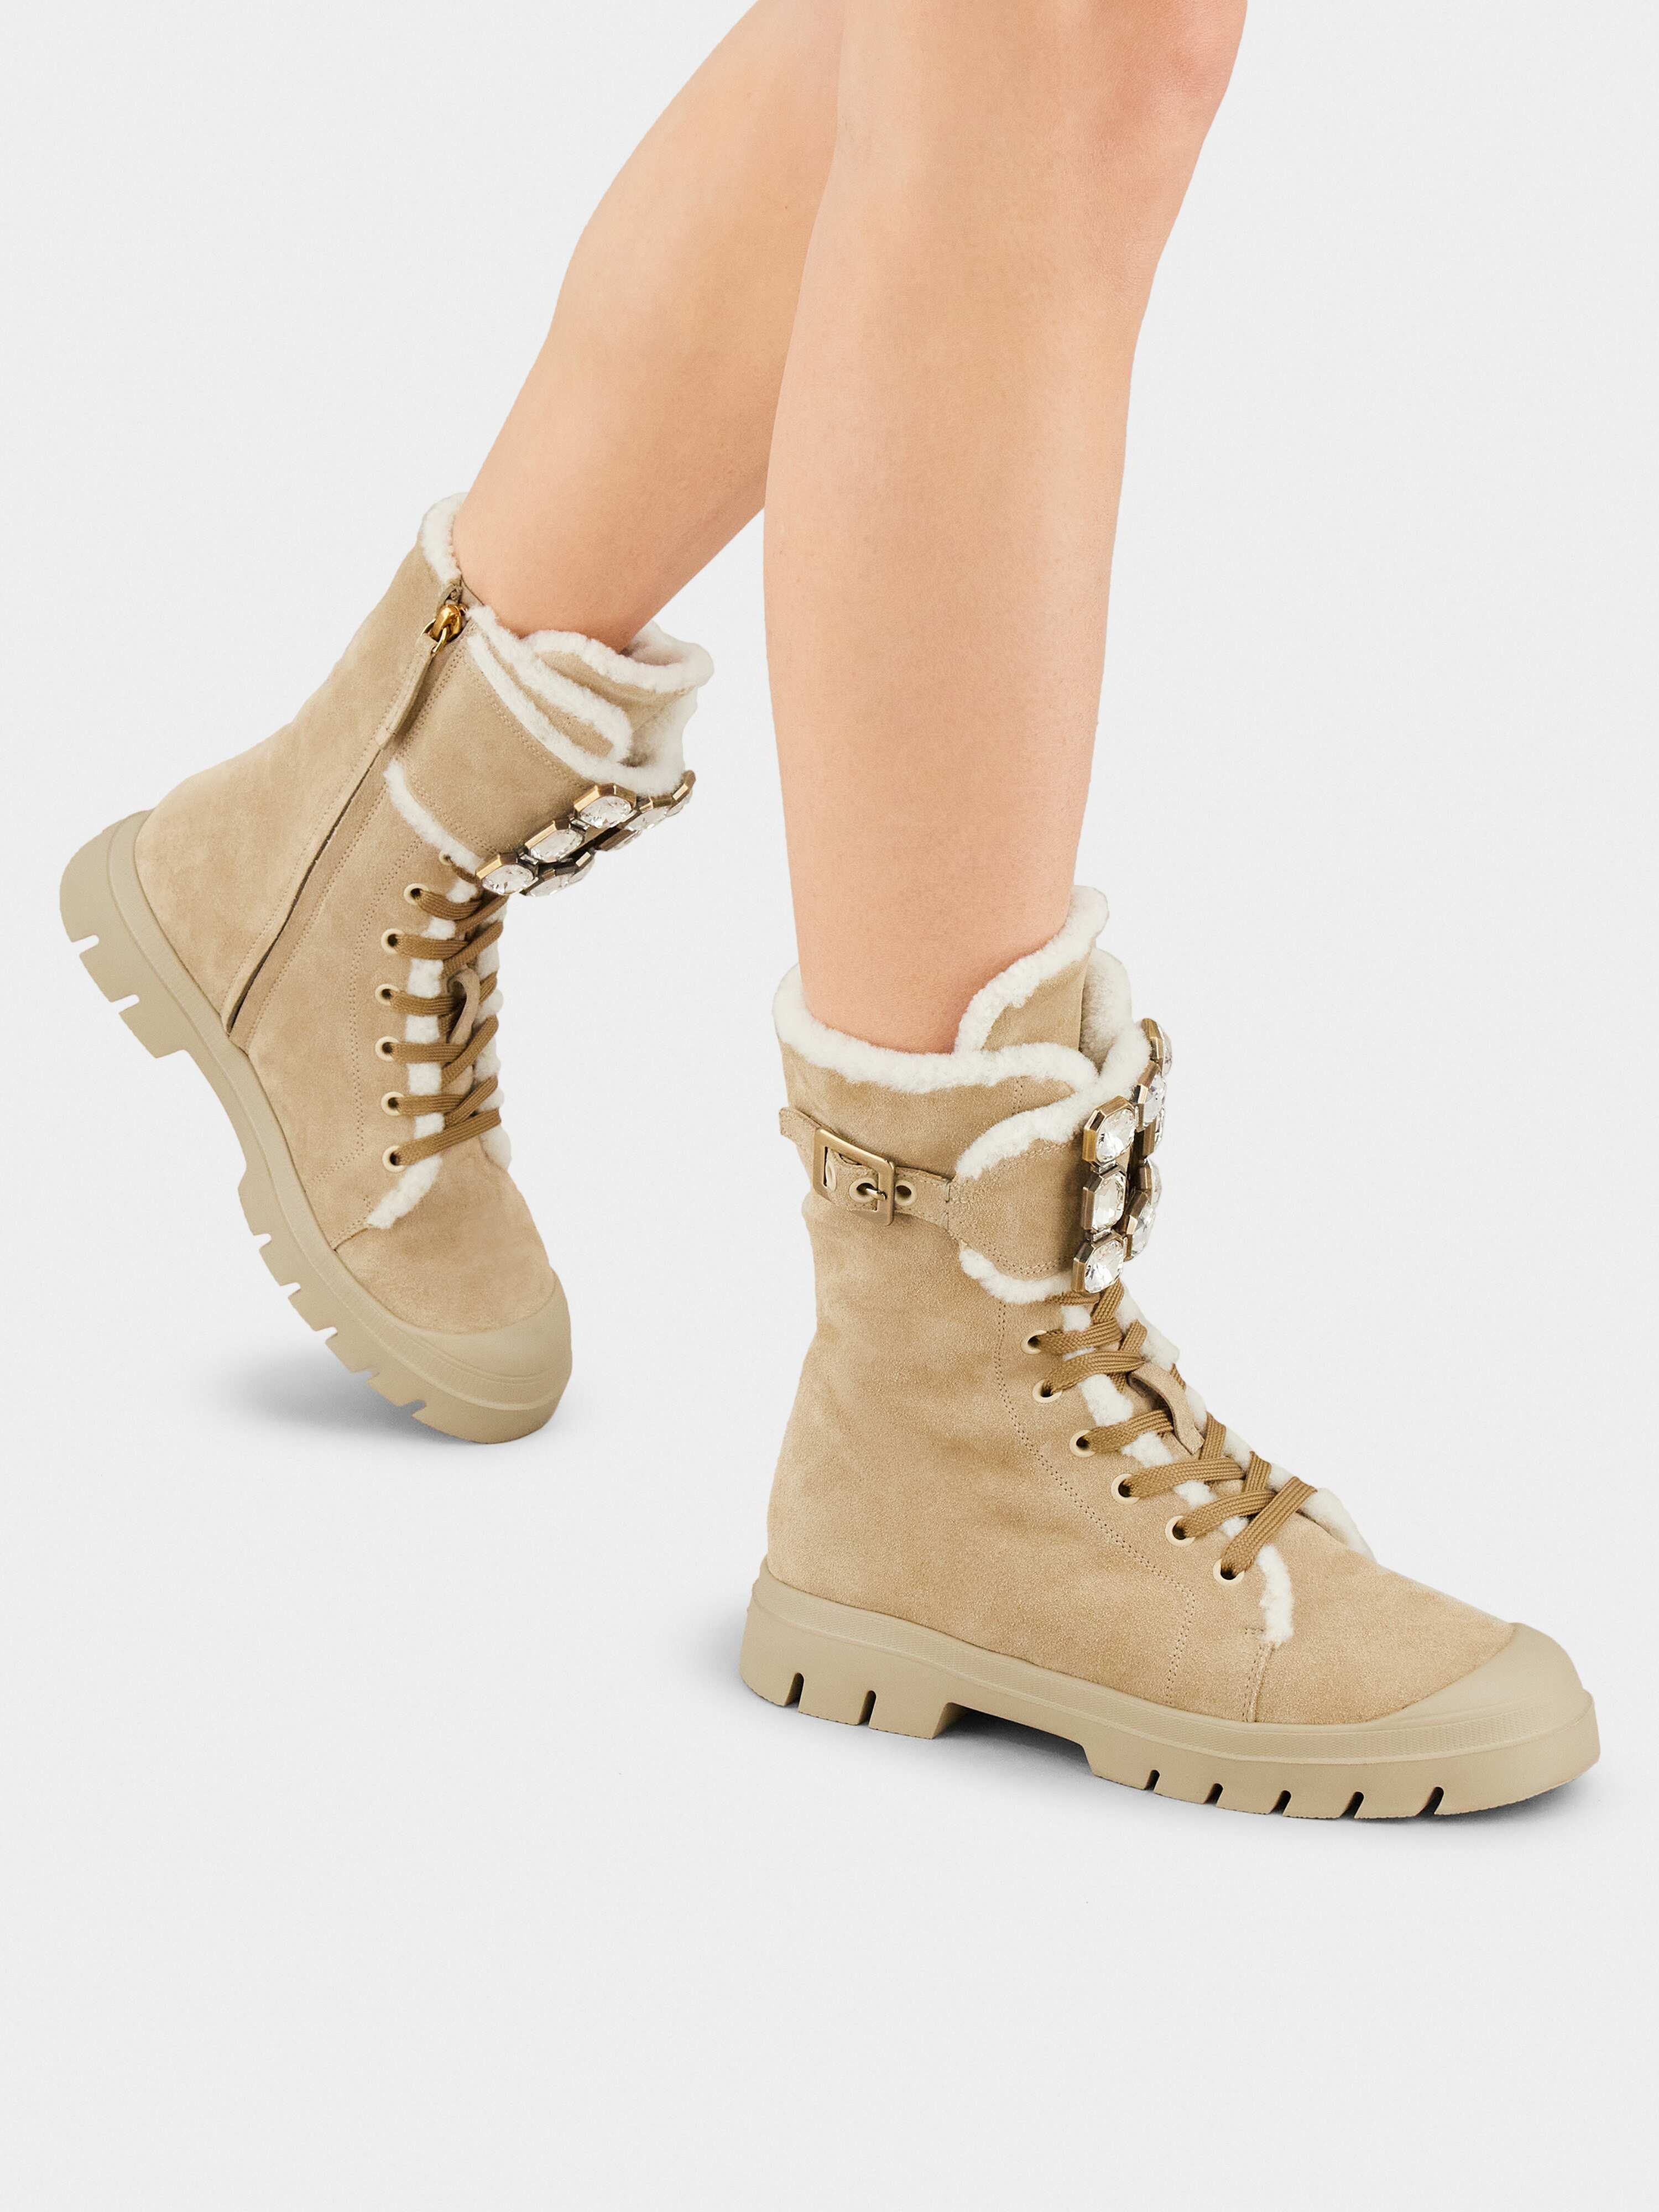 Walky Viv' Lace Up Shearling Strass Buckle Booties in Suede - 8